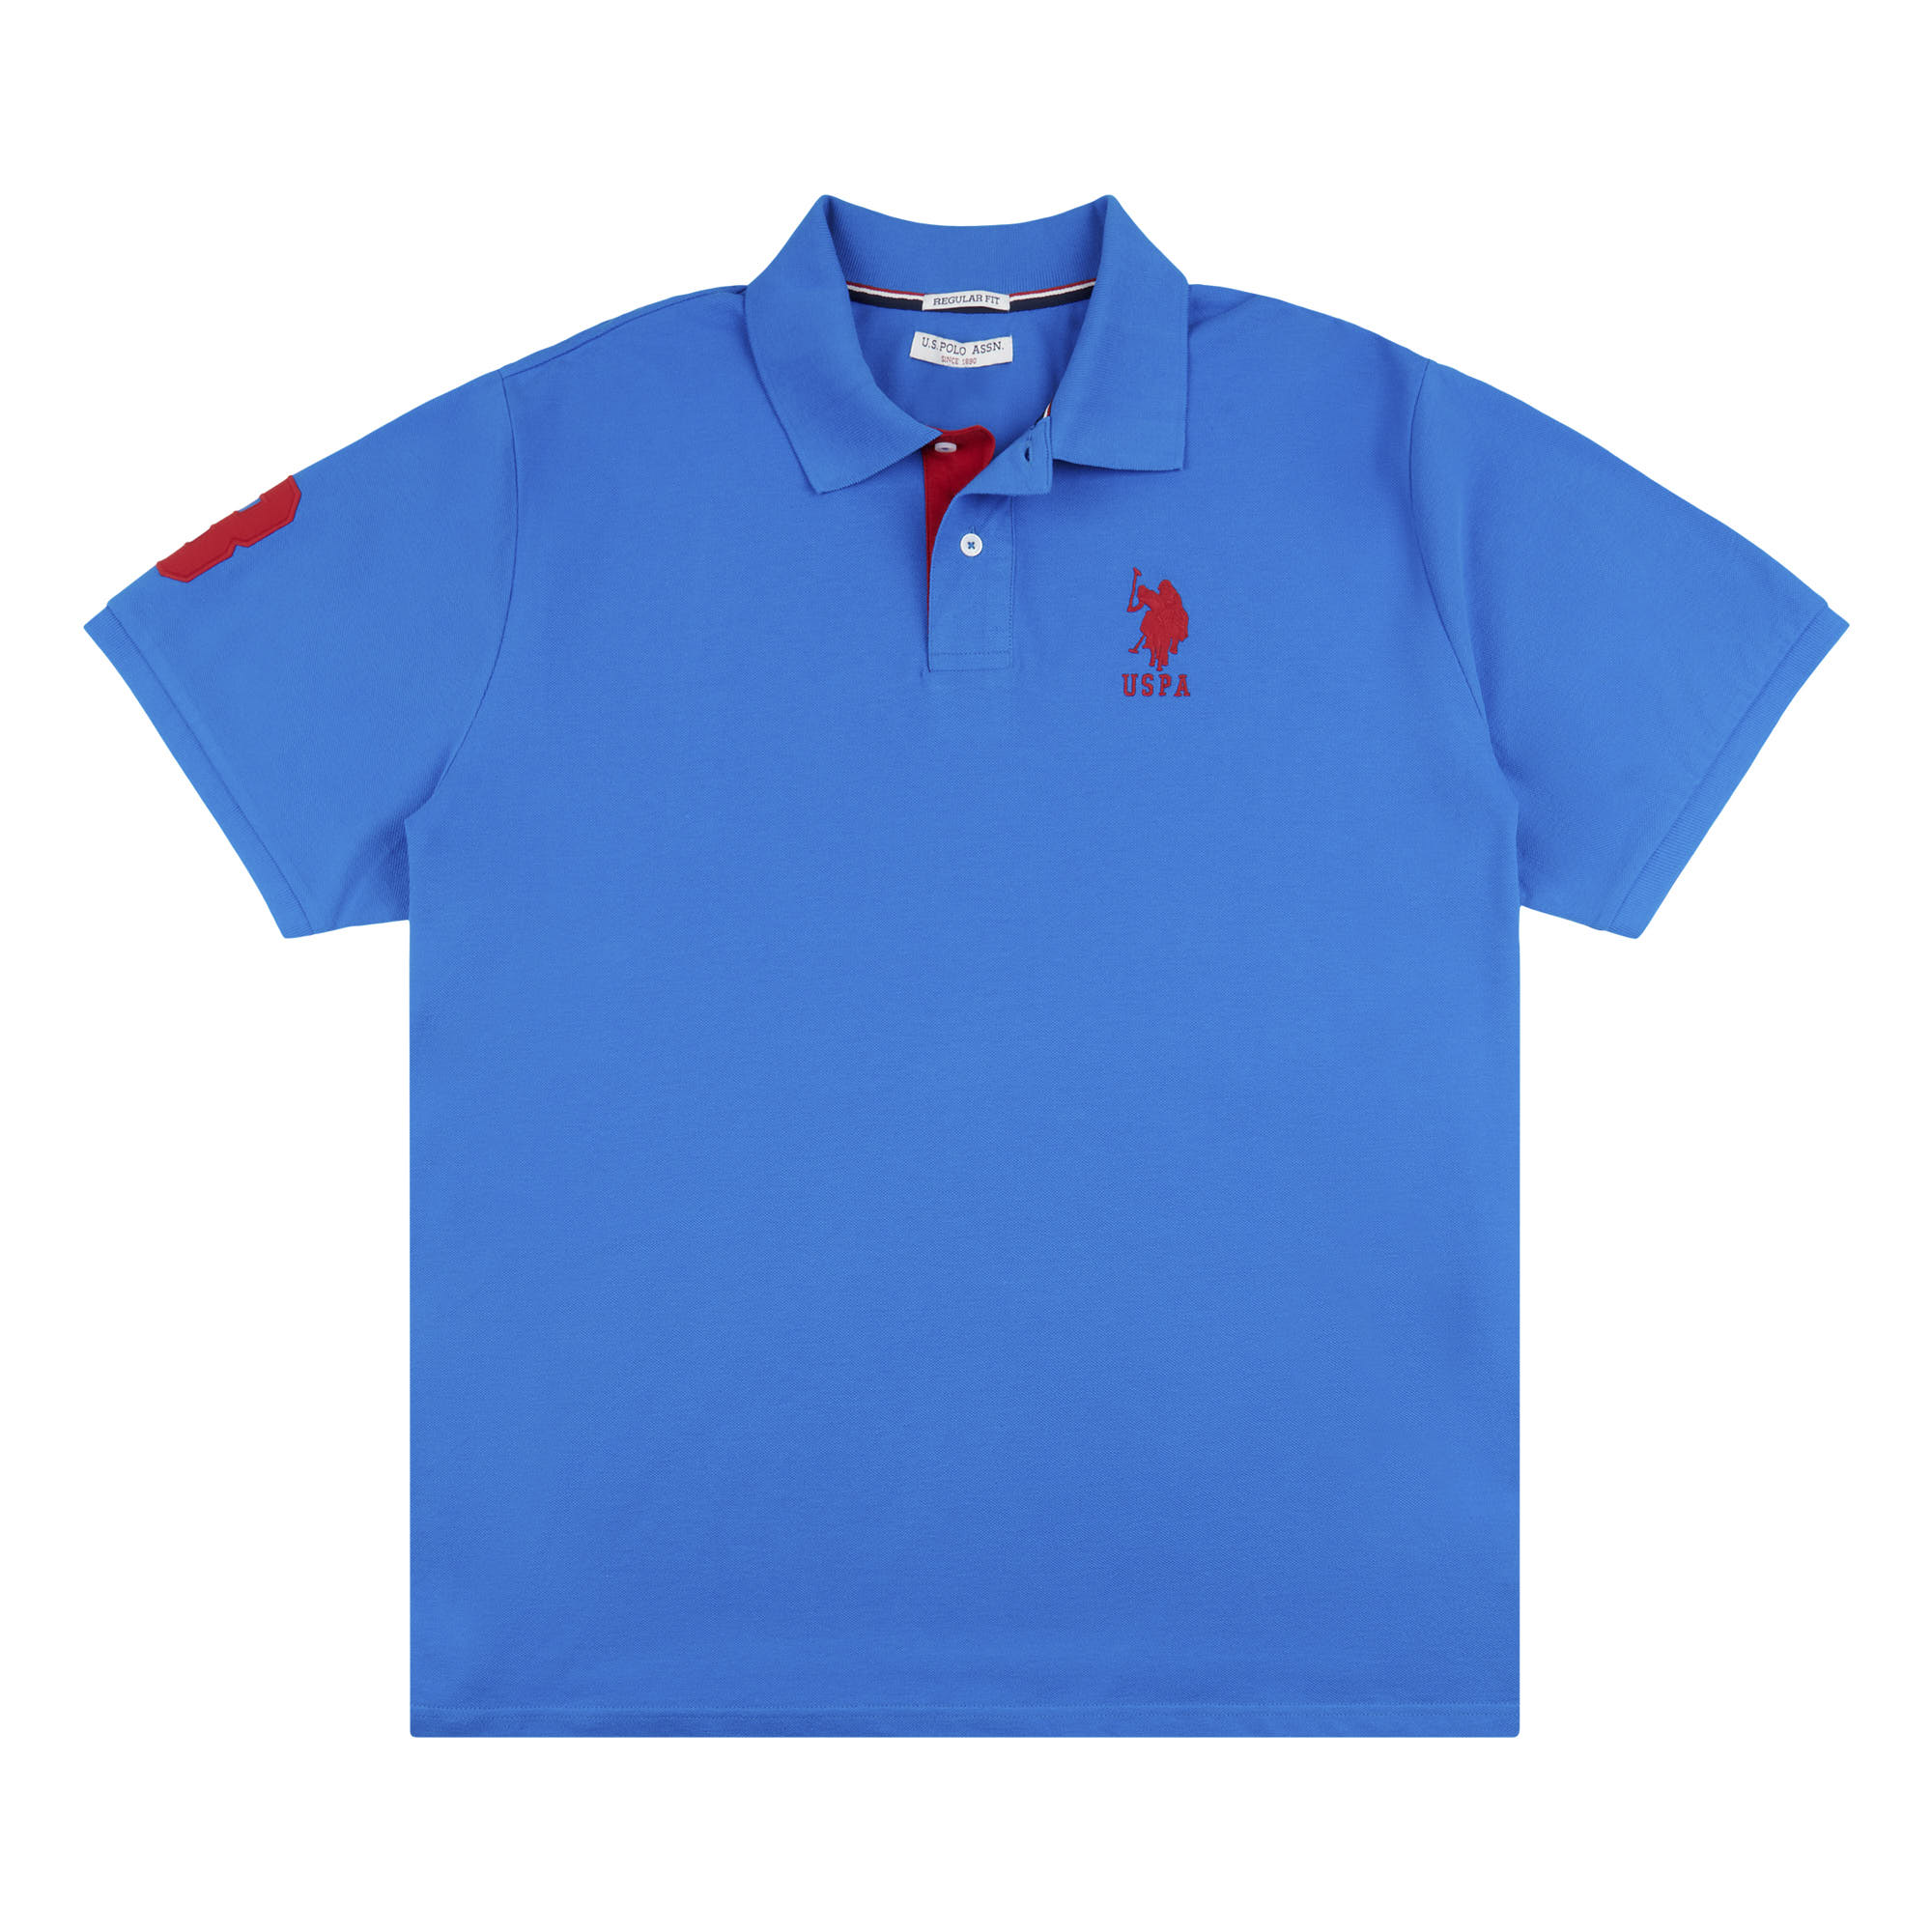 Mens Big & Tall Player 3 Polo Shirt in Directoire Blue